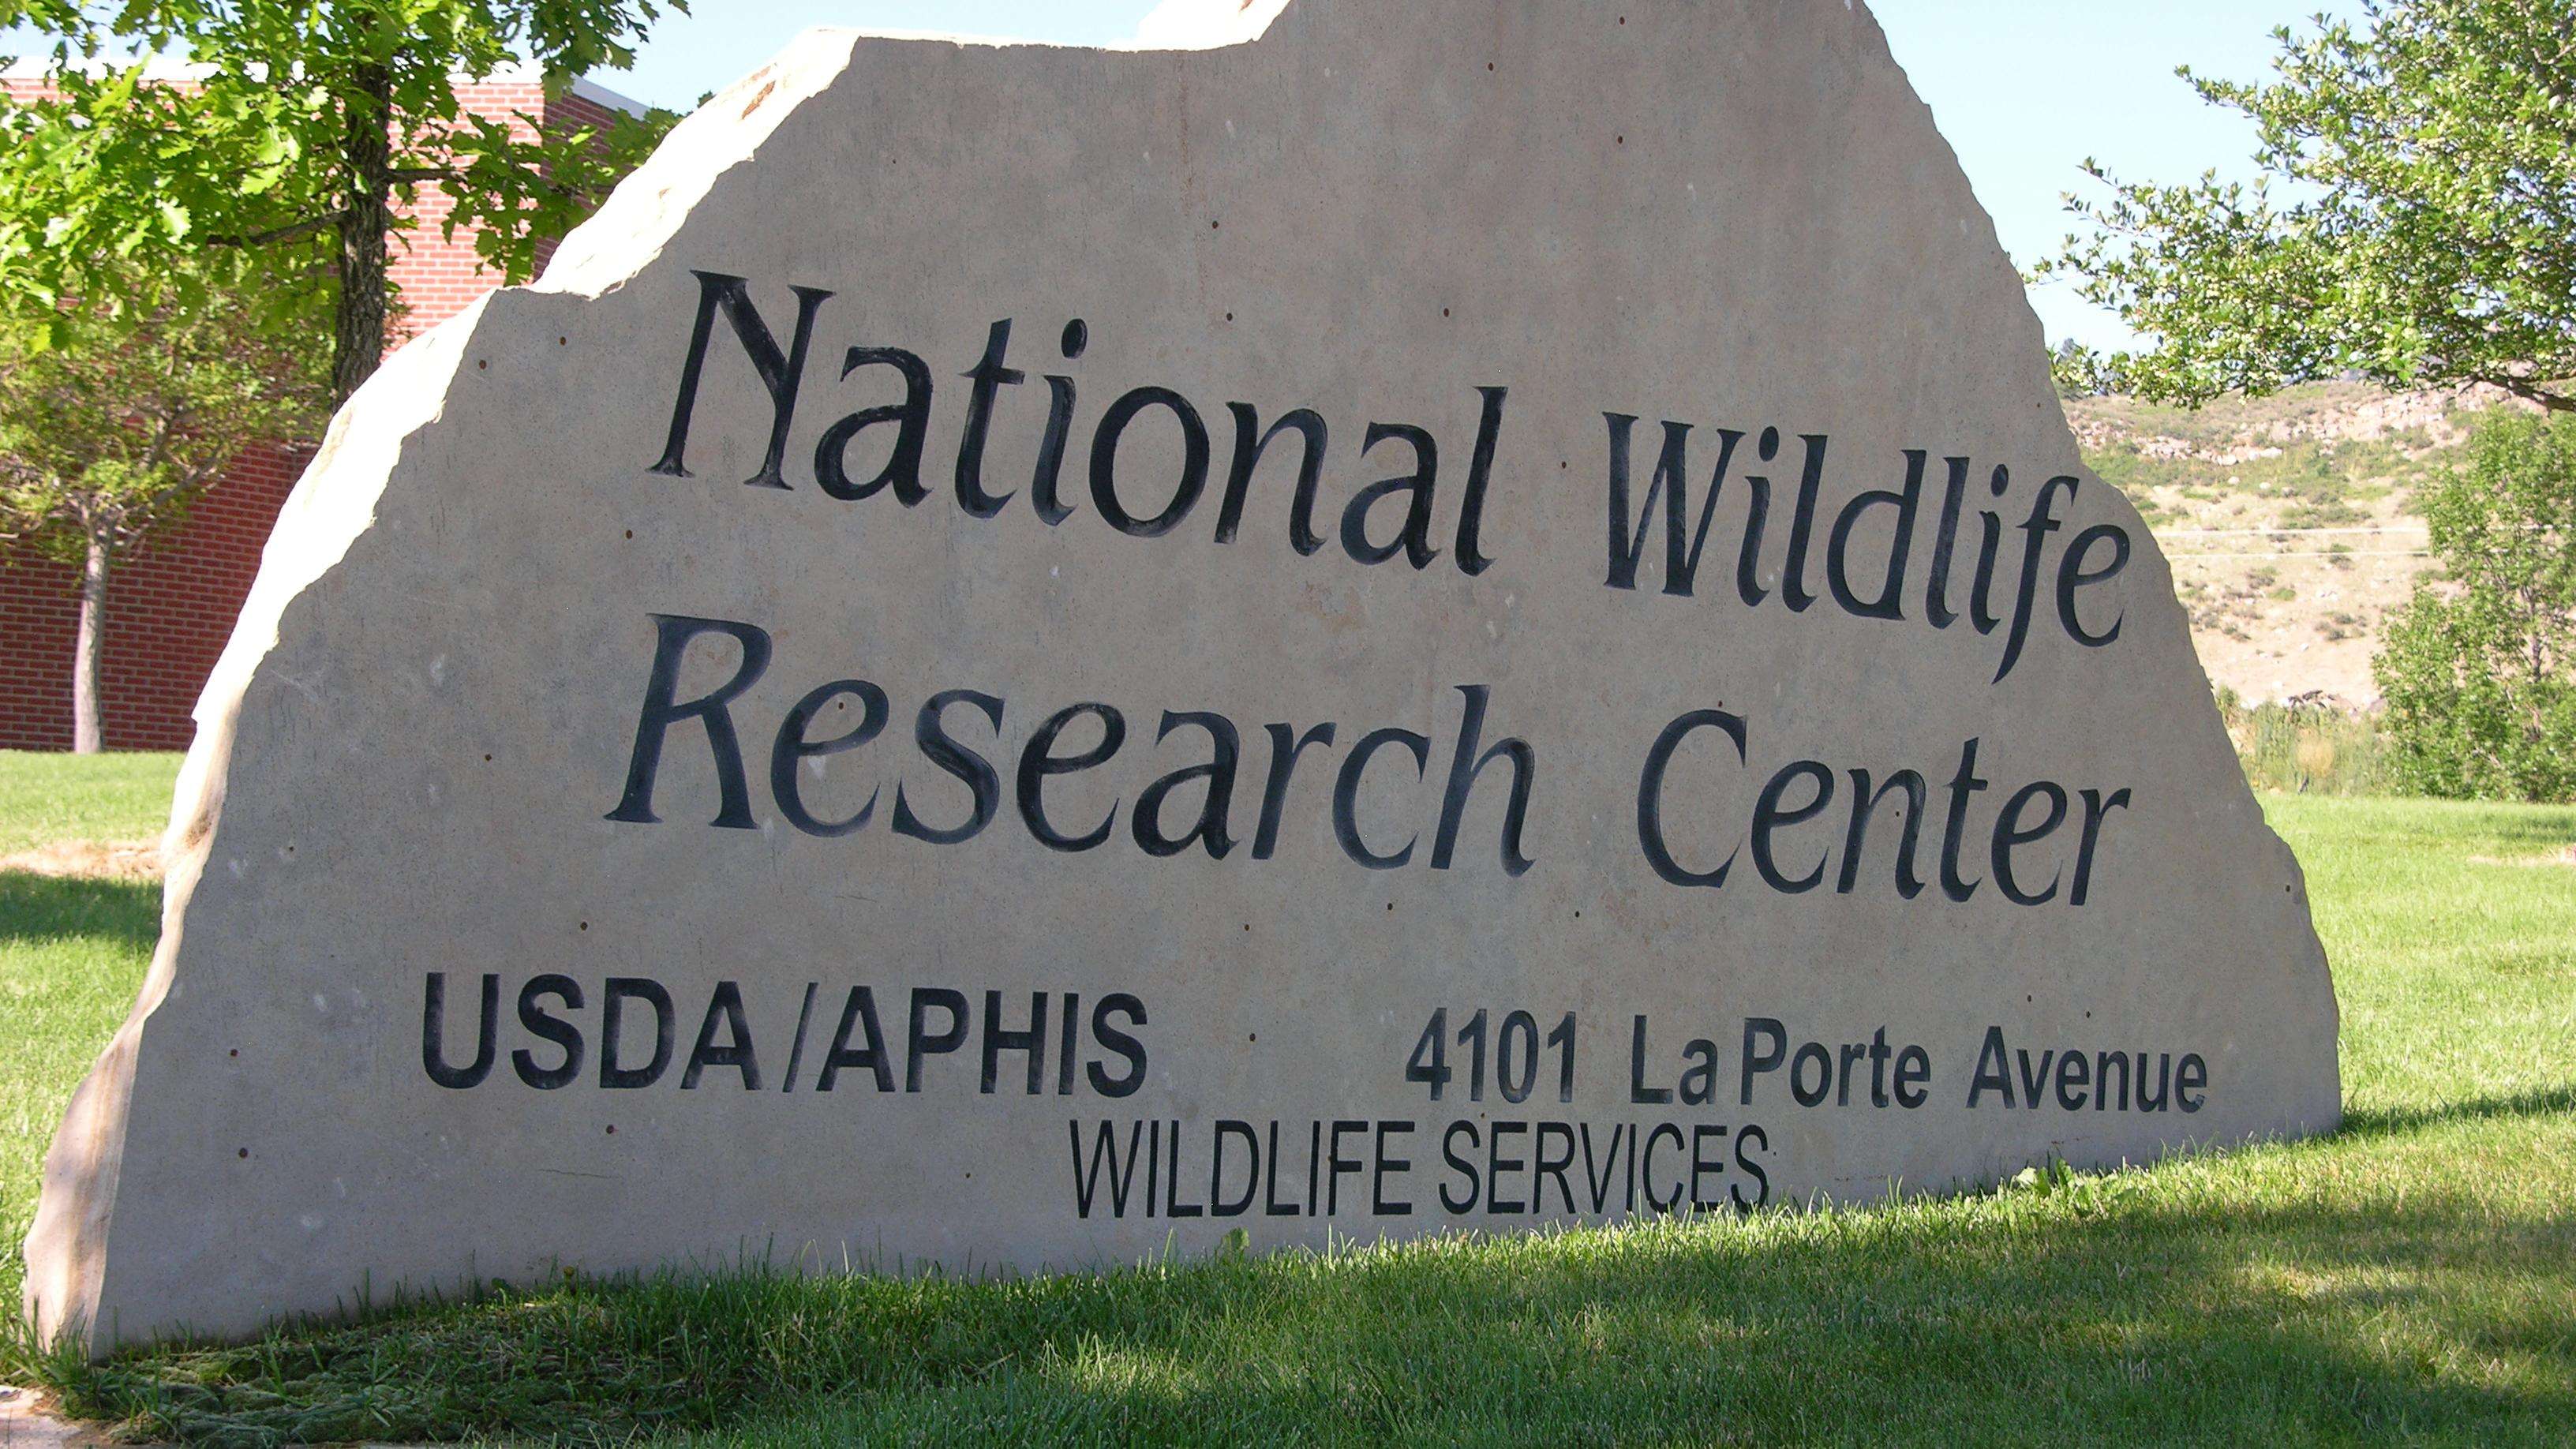 National Wildlife Research Center building sign